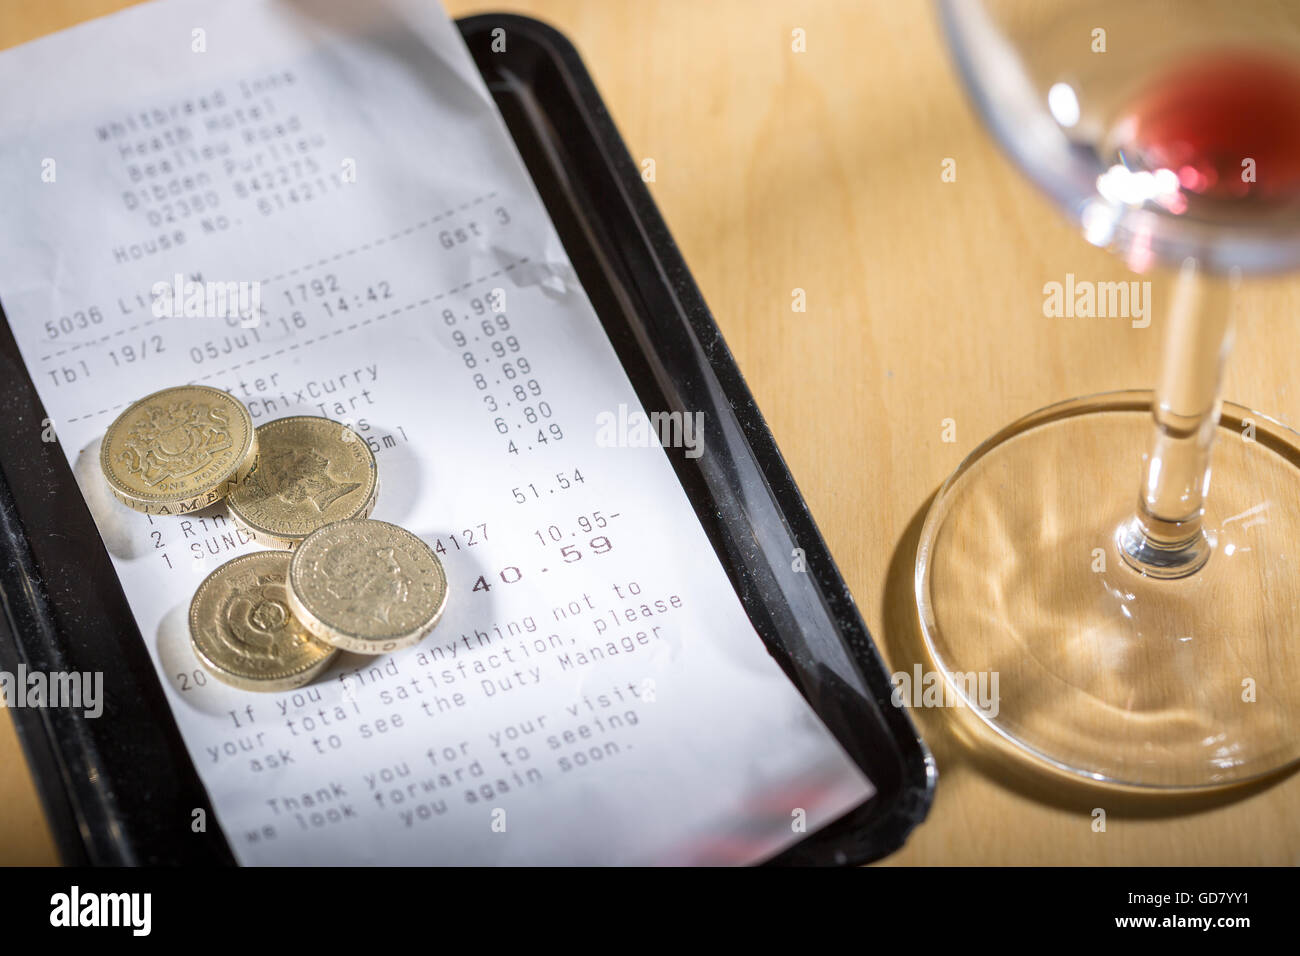 Leaving a tip for the waiter / waitress after a meal in a restaurant Stock Photo